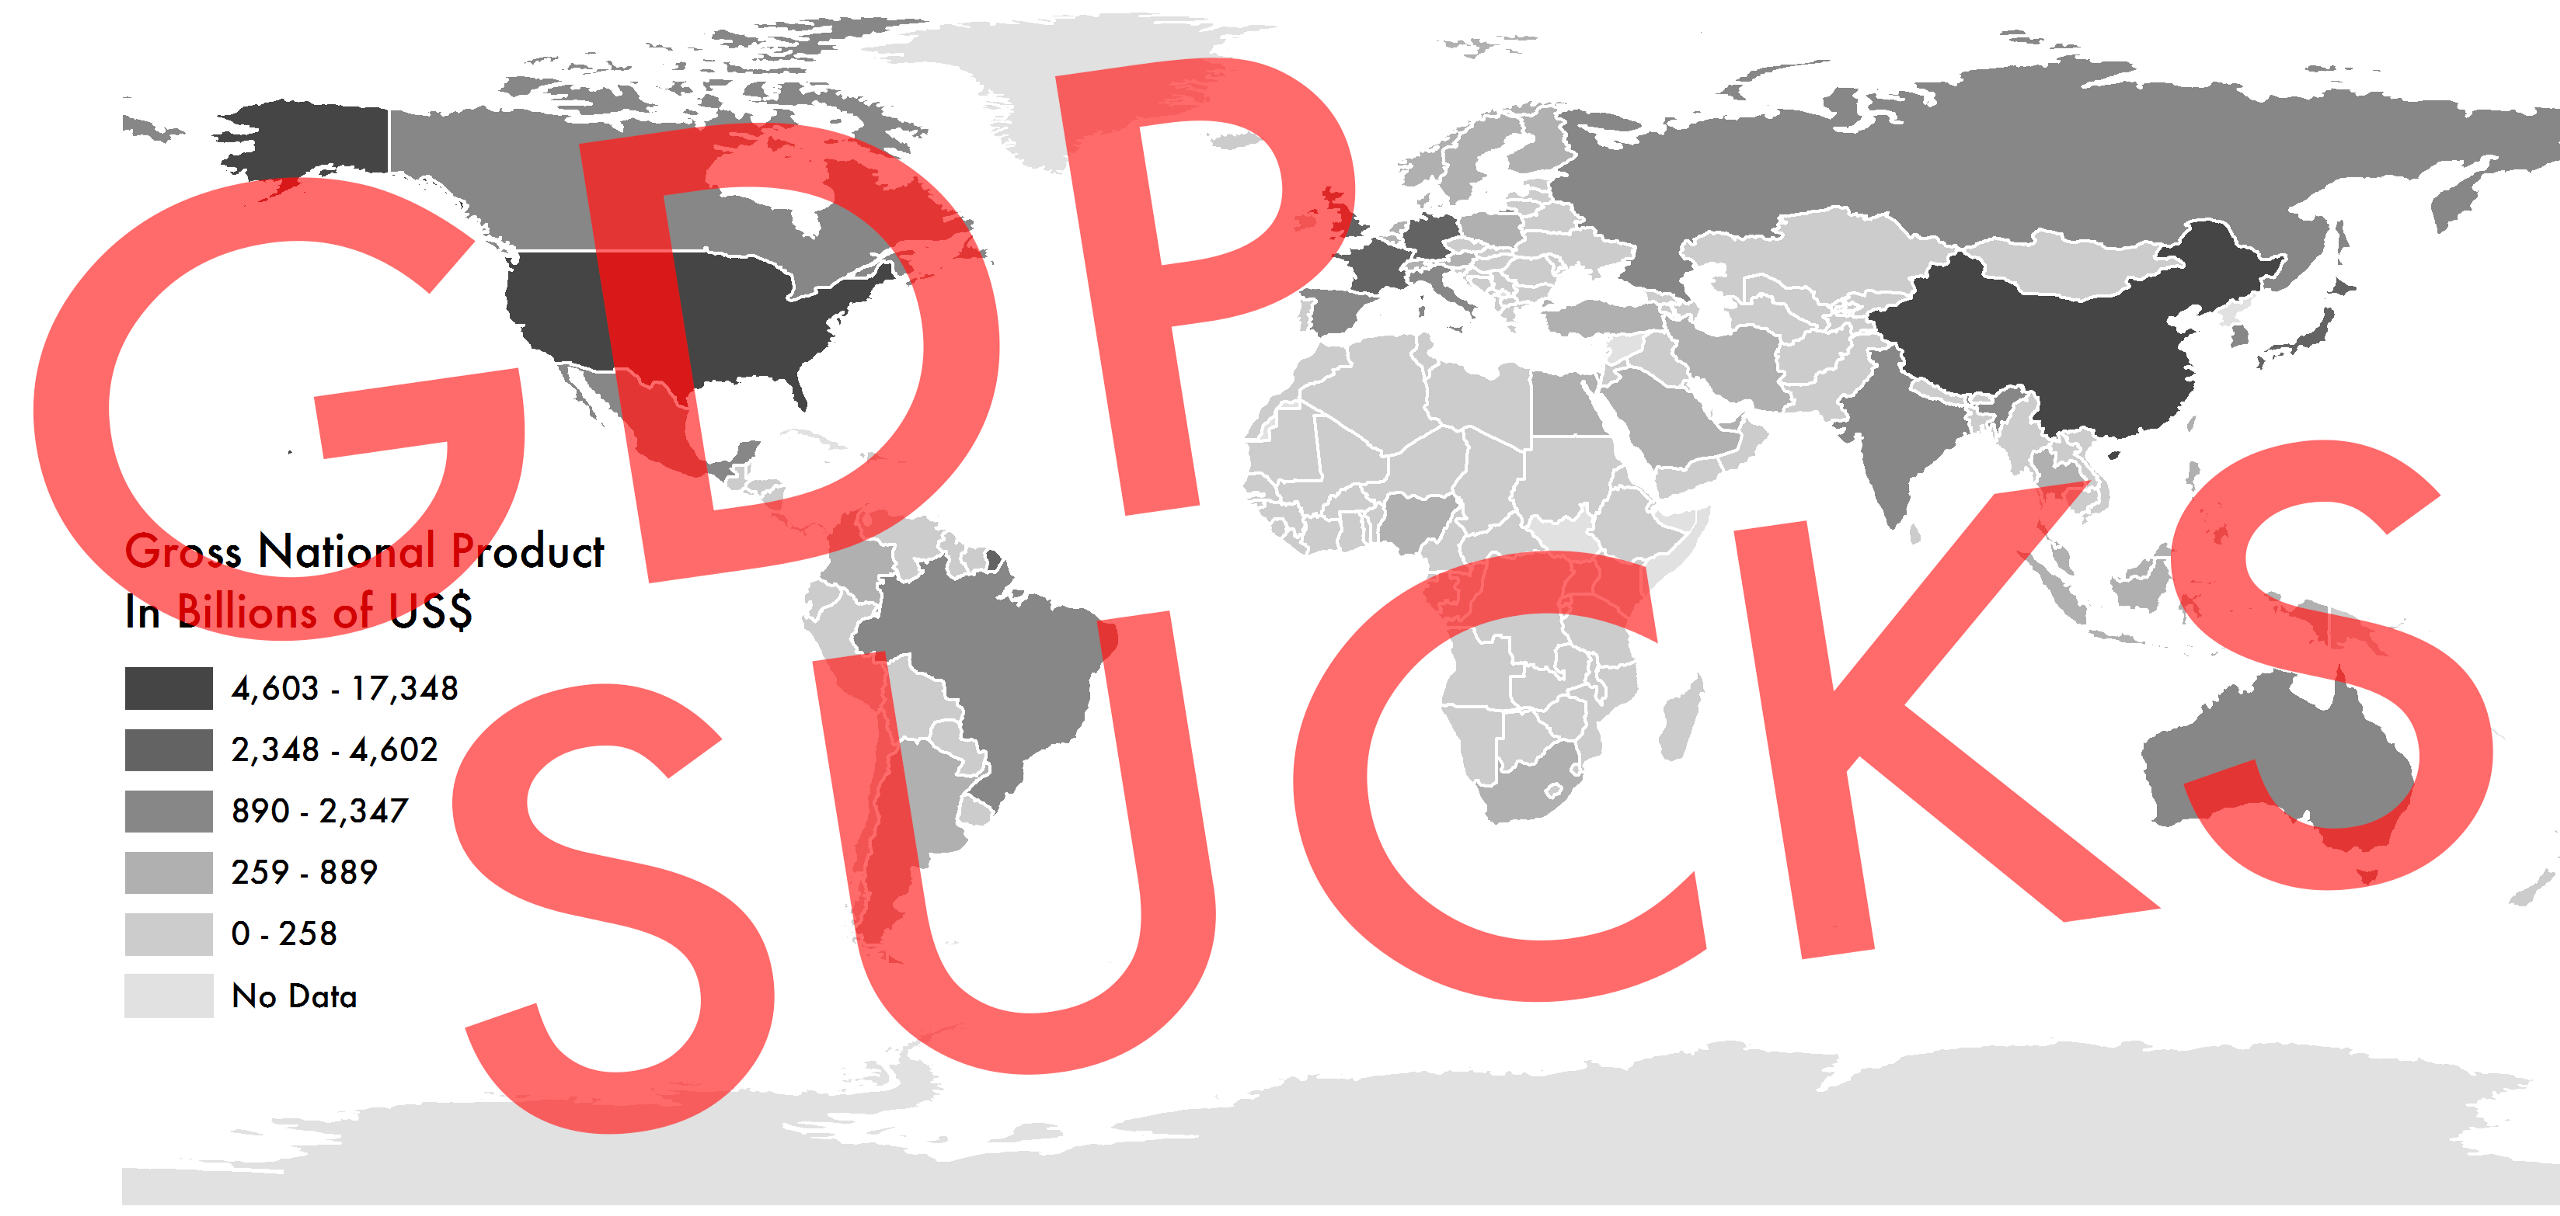 A map of the world with nations color-coded by GNP, with the words "GDP SUCKS" overlaid on top.